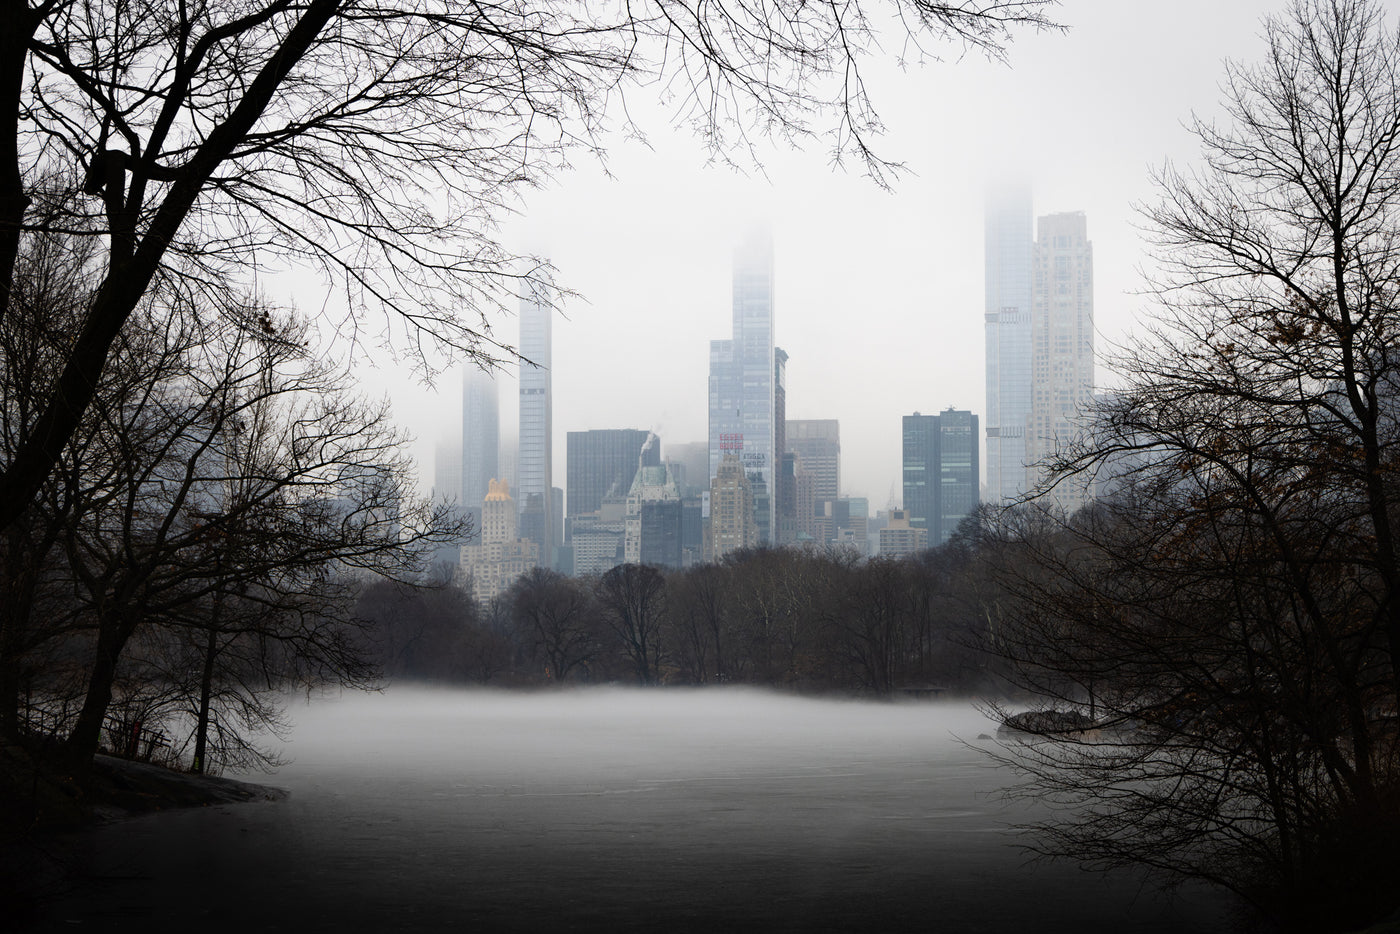 Foggy lake in Central Park with sky scrapers in the background